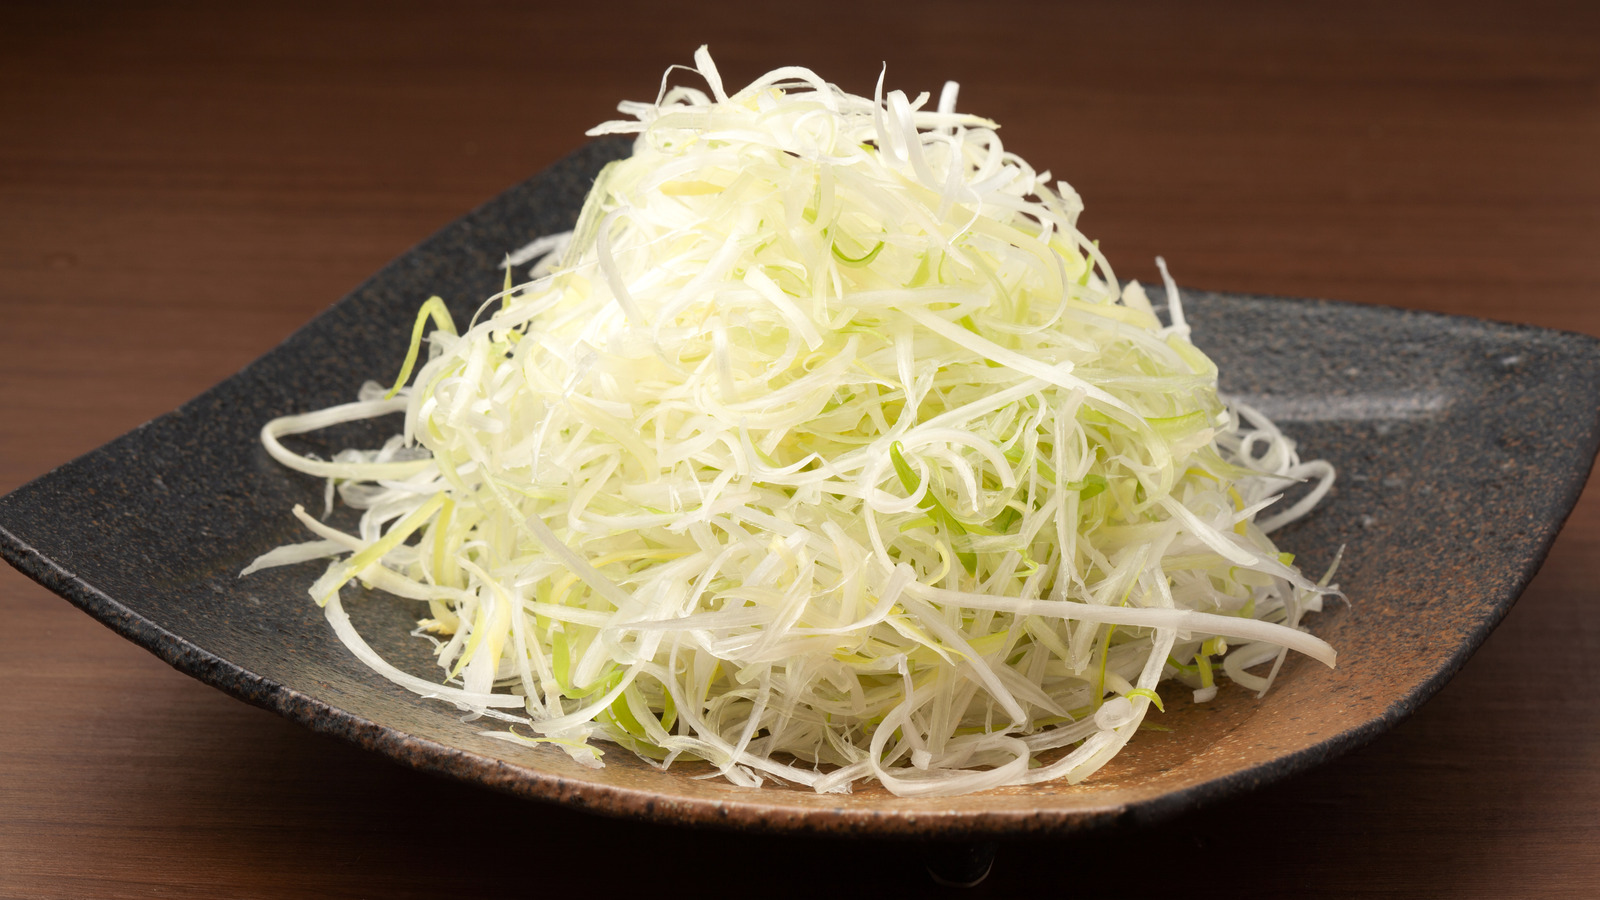 Paper-thin onion slices